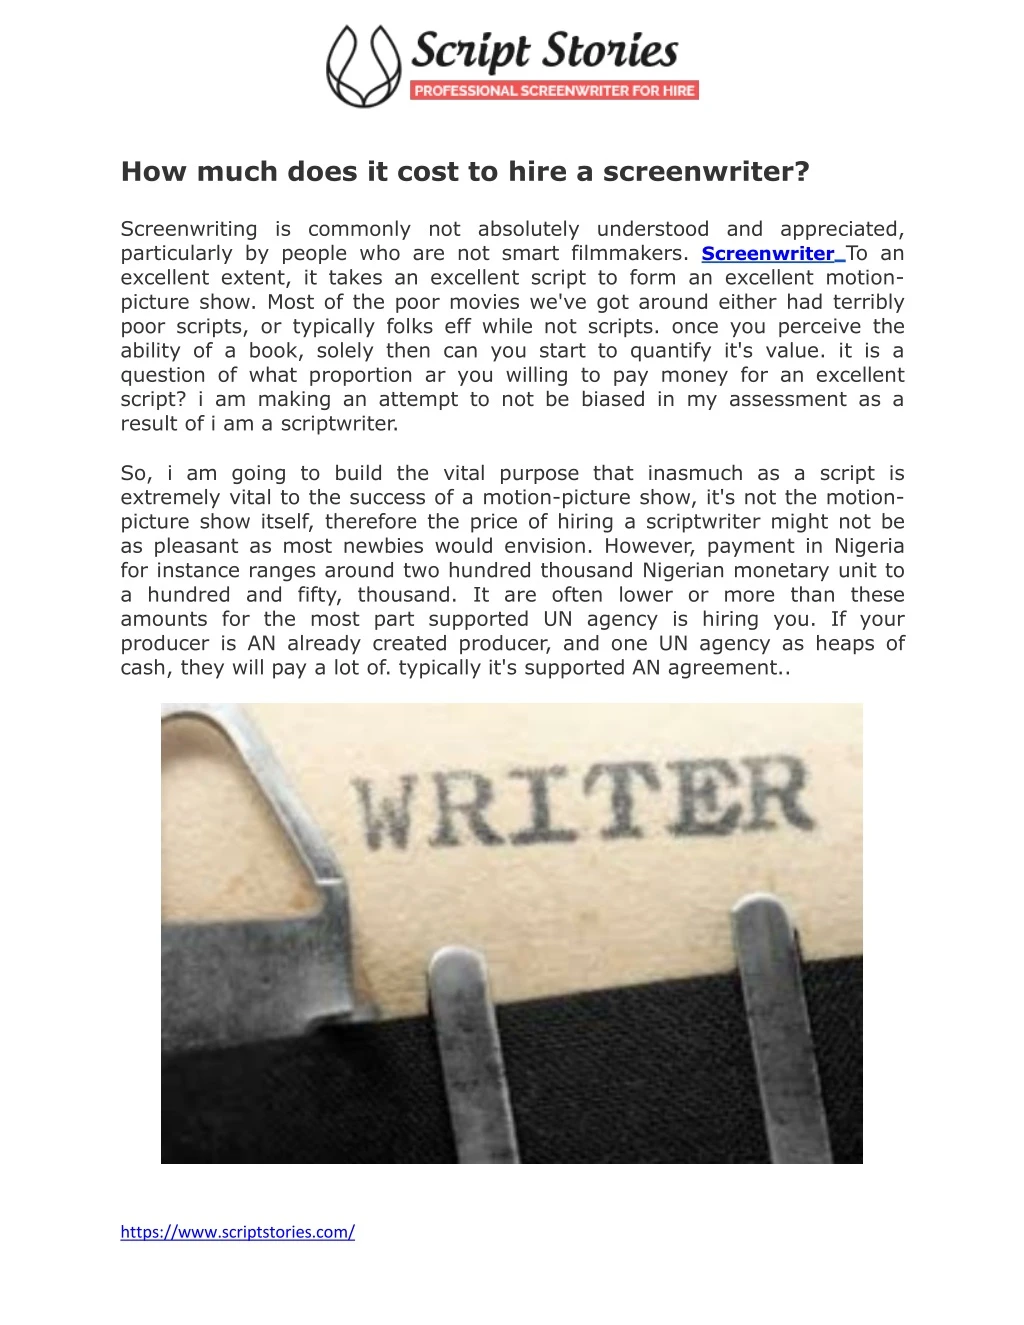 how much does it cost to hire a screenwriter